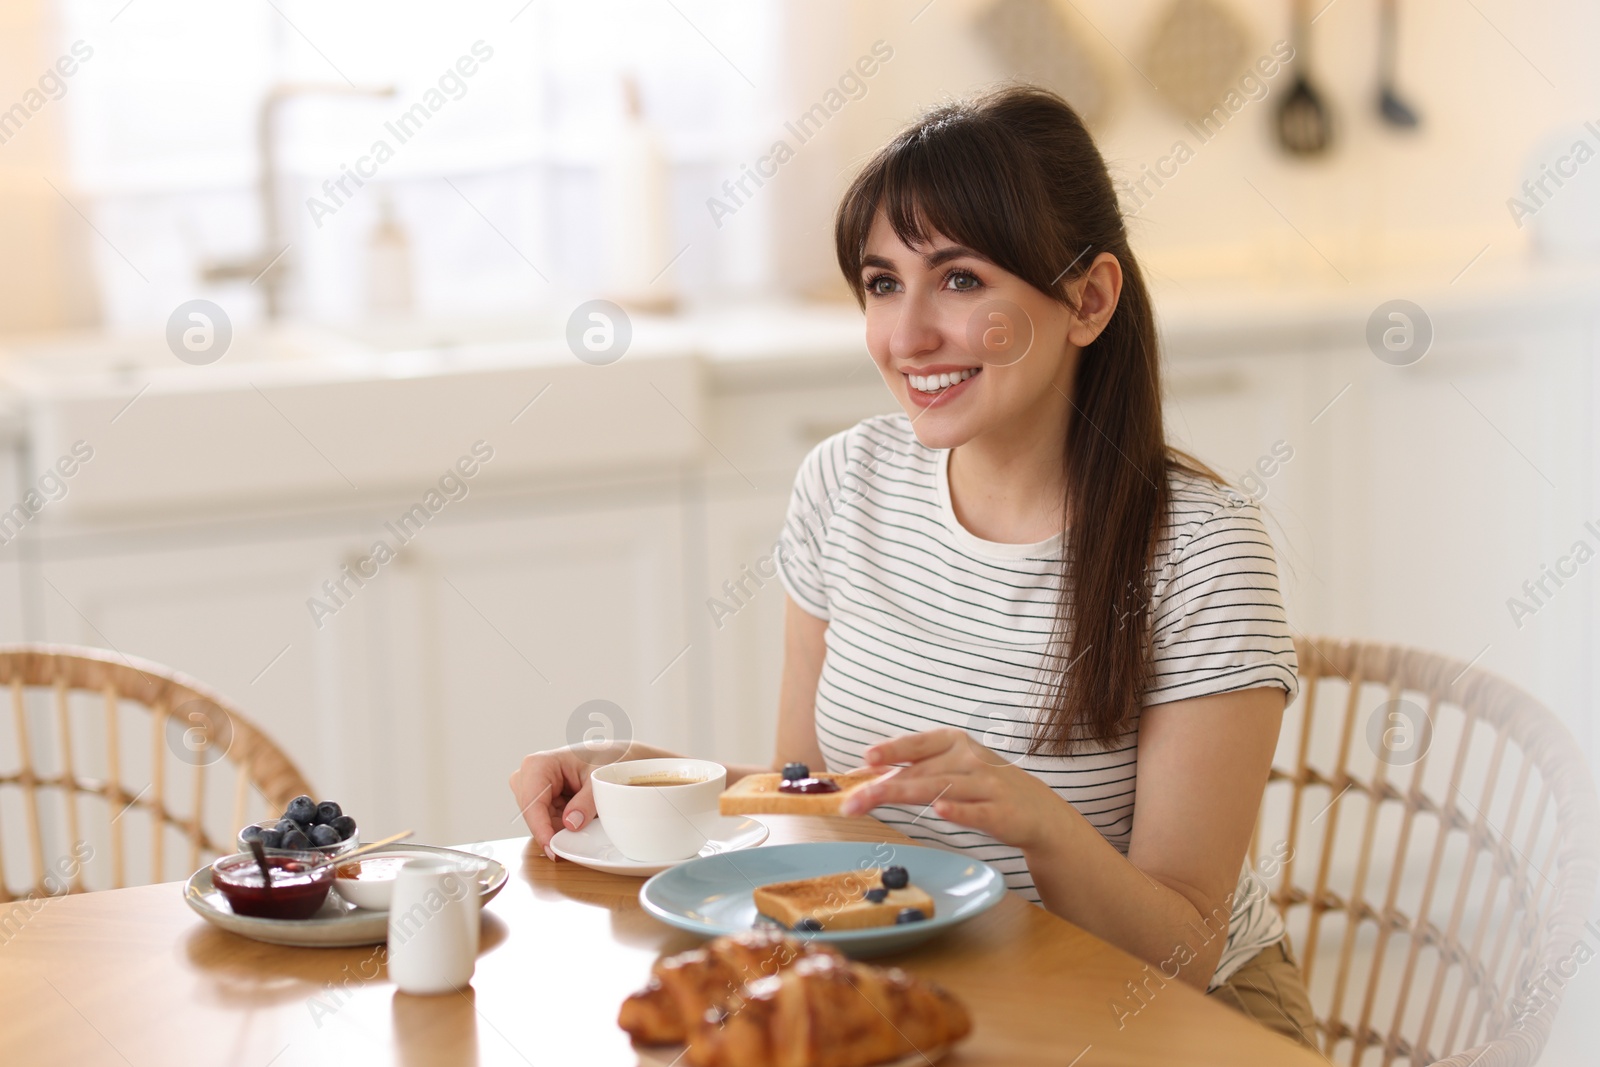 Photo of Smiling woman eating tasty breakfast at table indoors